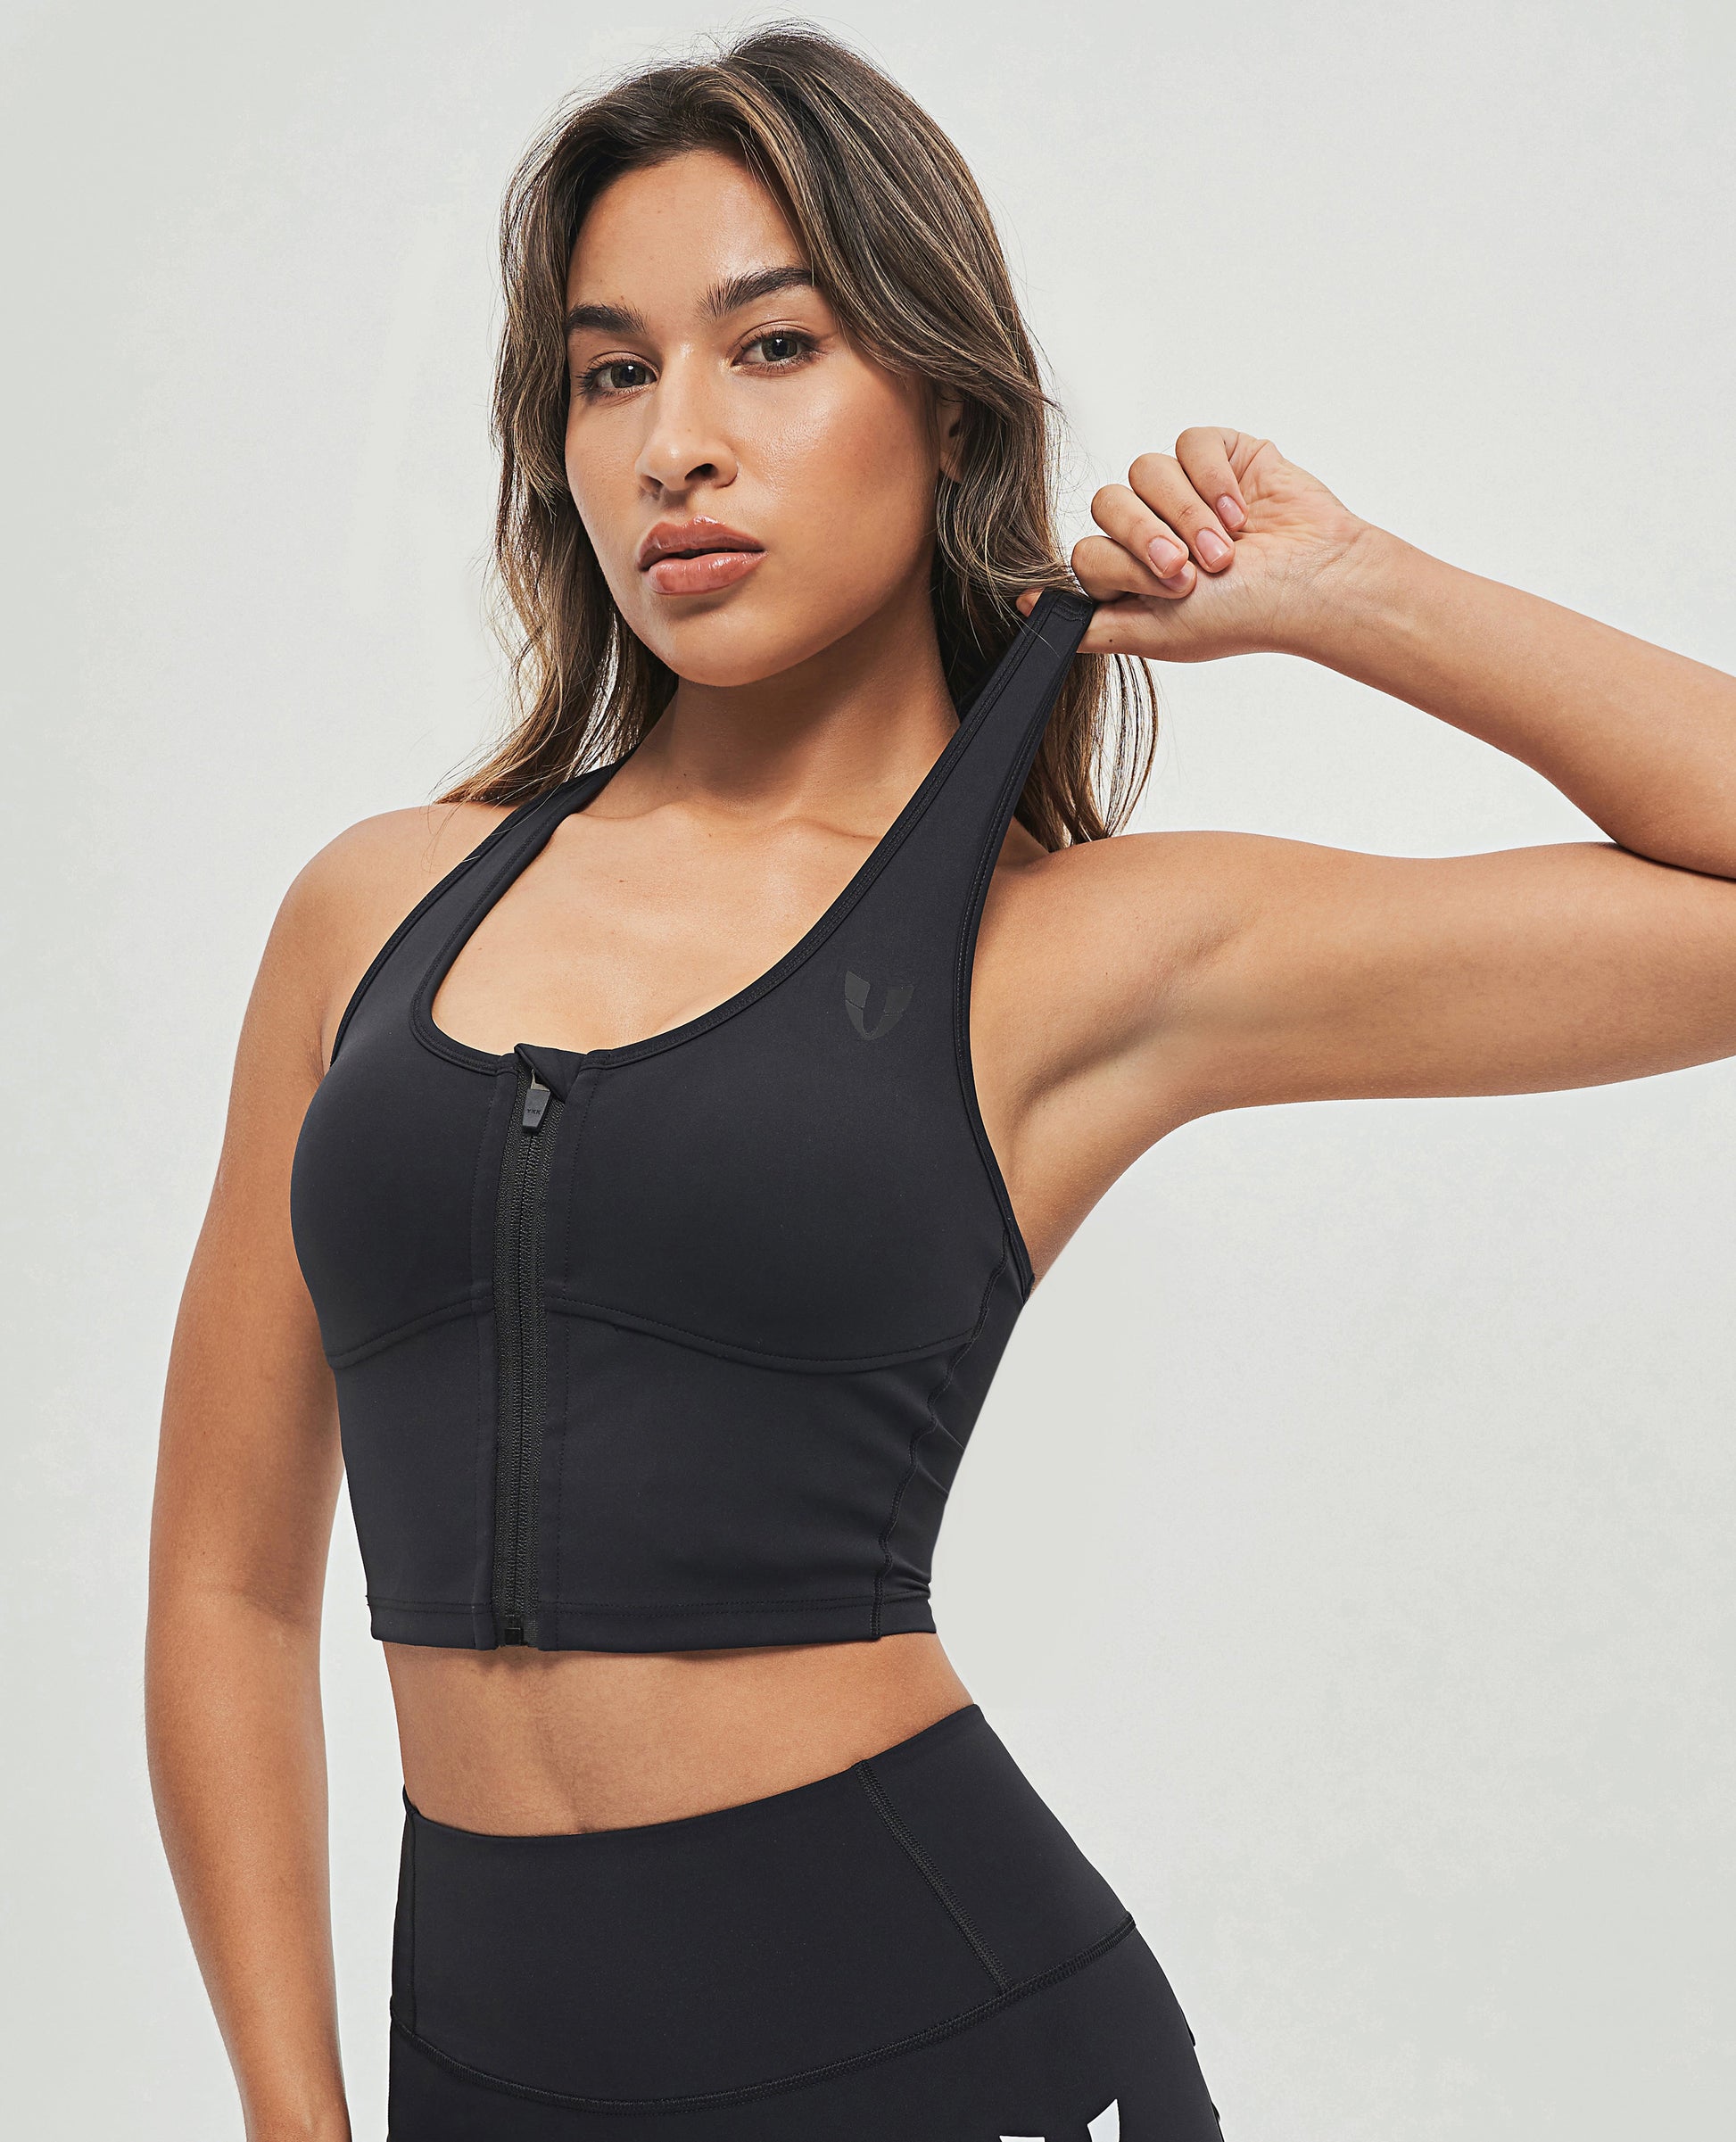 FIRM ABS: Everything You Need To Know About The Sports Bra!